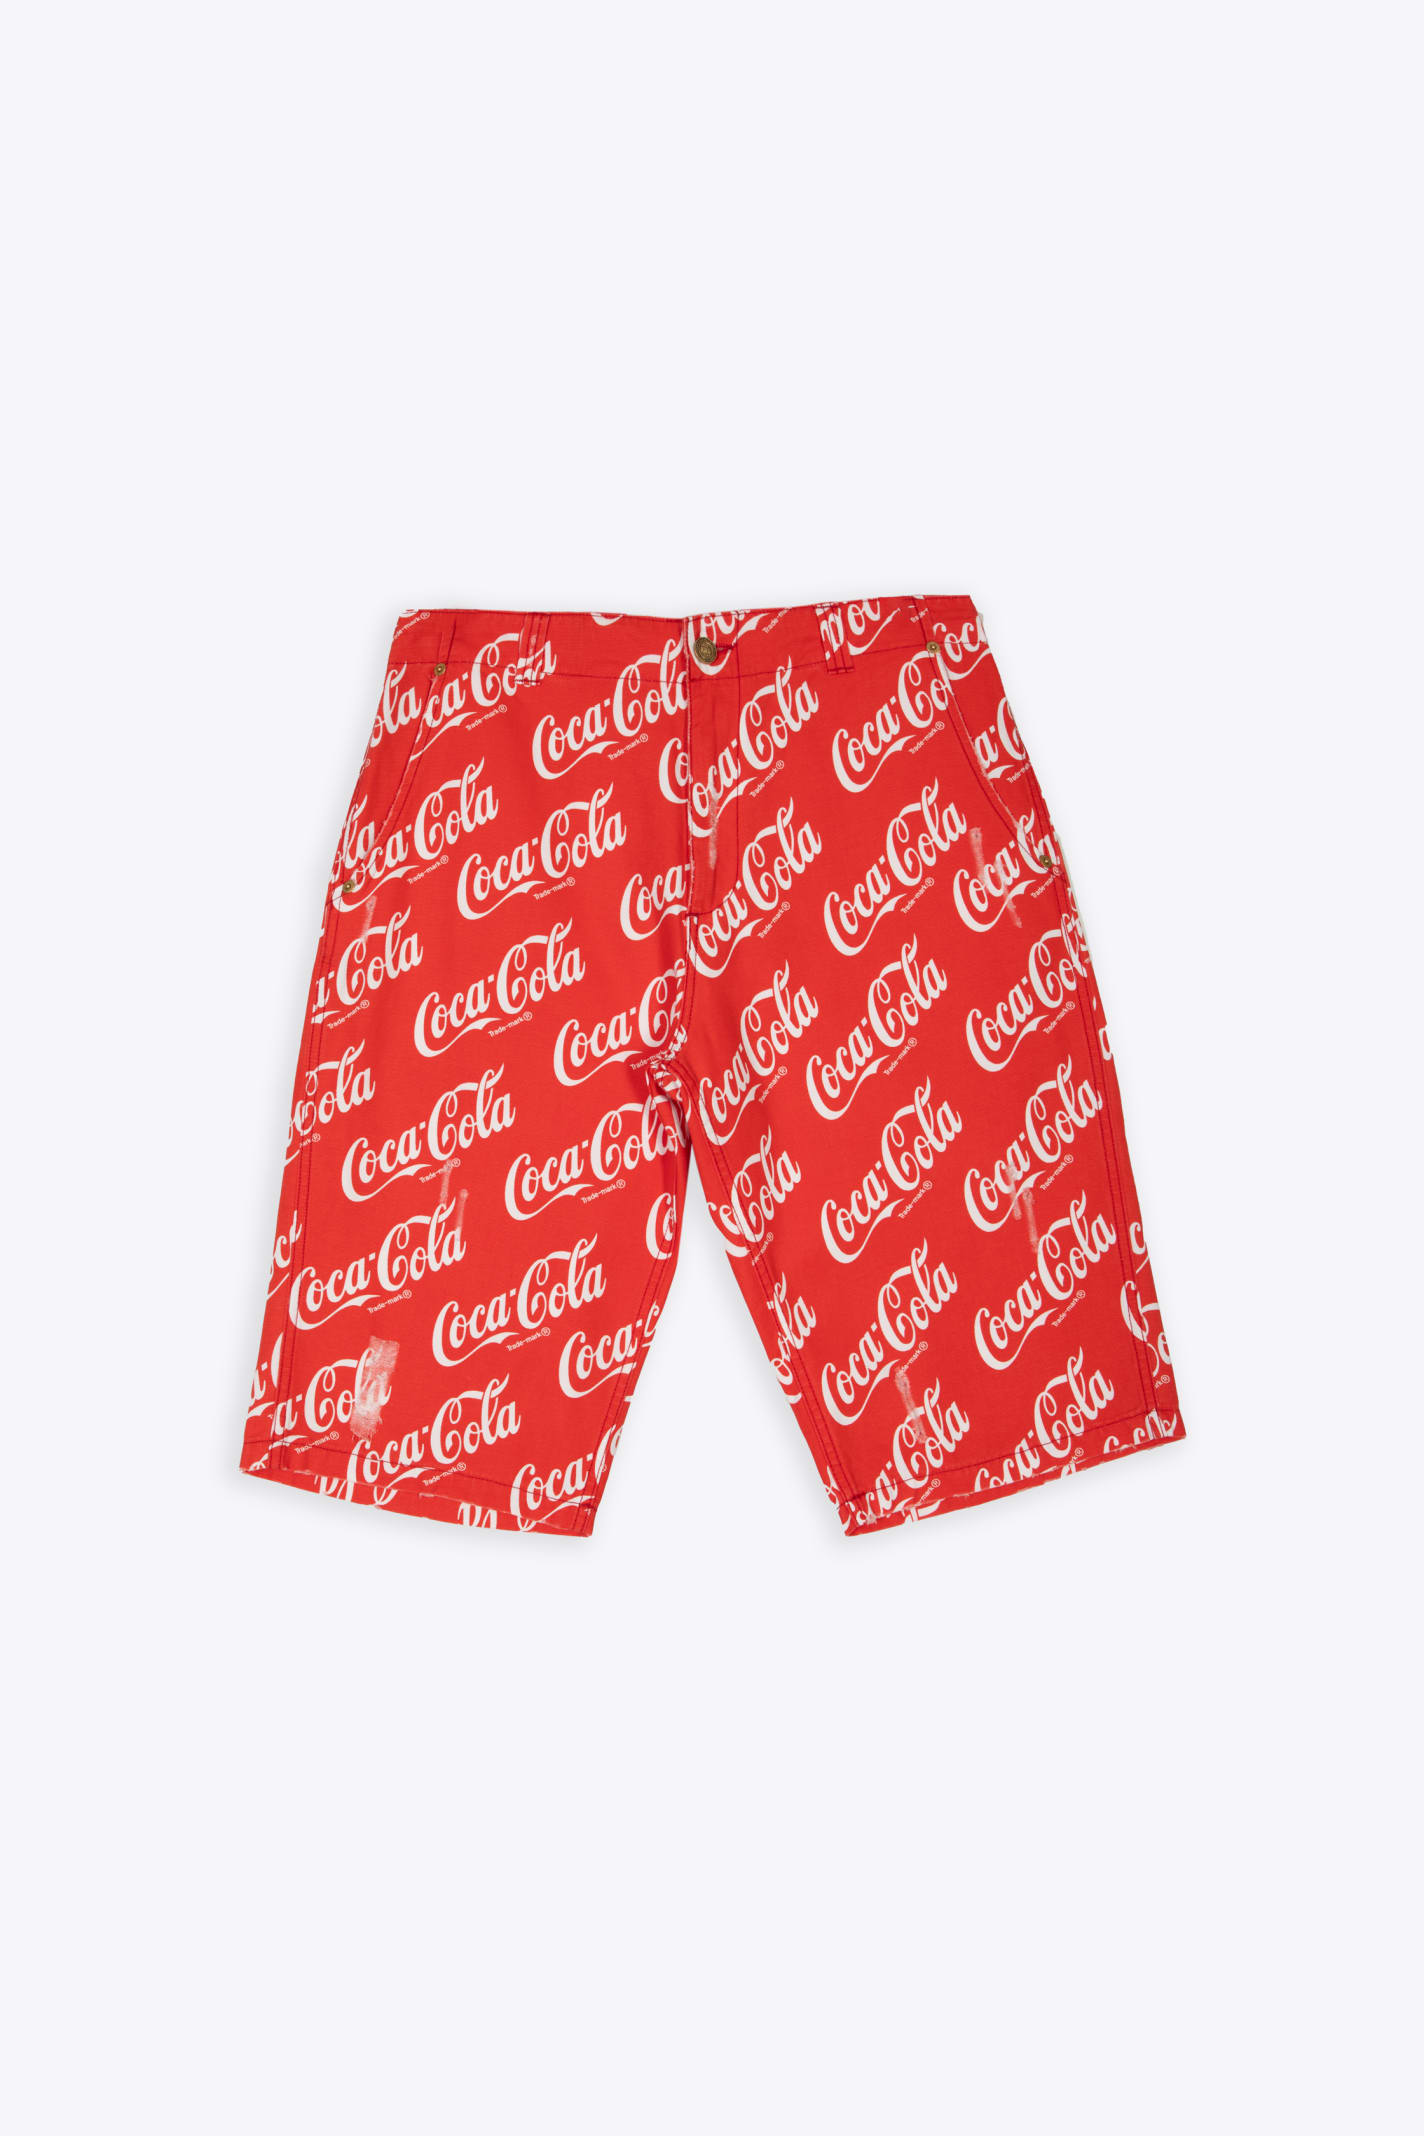 Unisex Printed Canvas Shorts Woven Red canvas Coca Cola baggy shorts - Unisex Printed Canvas Short Woven